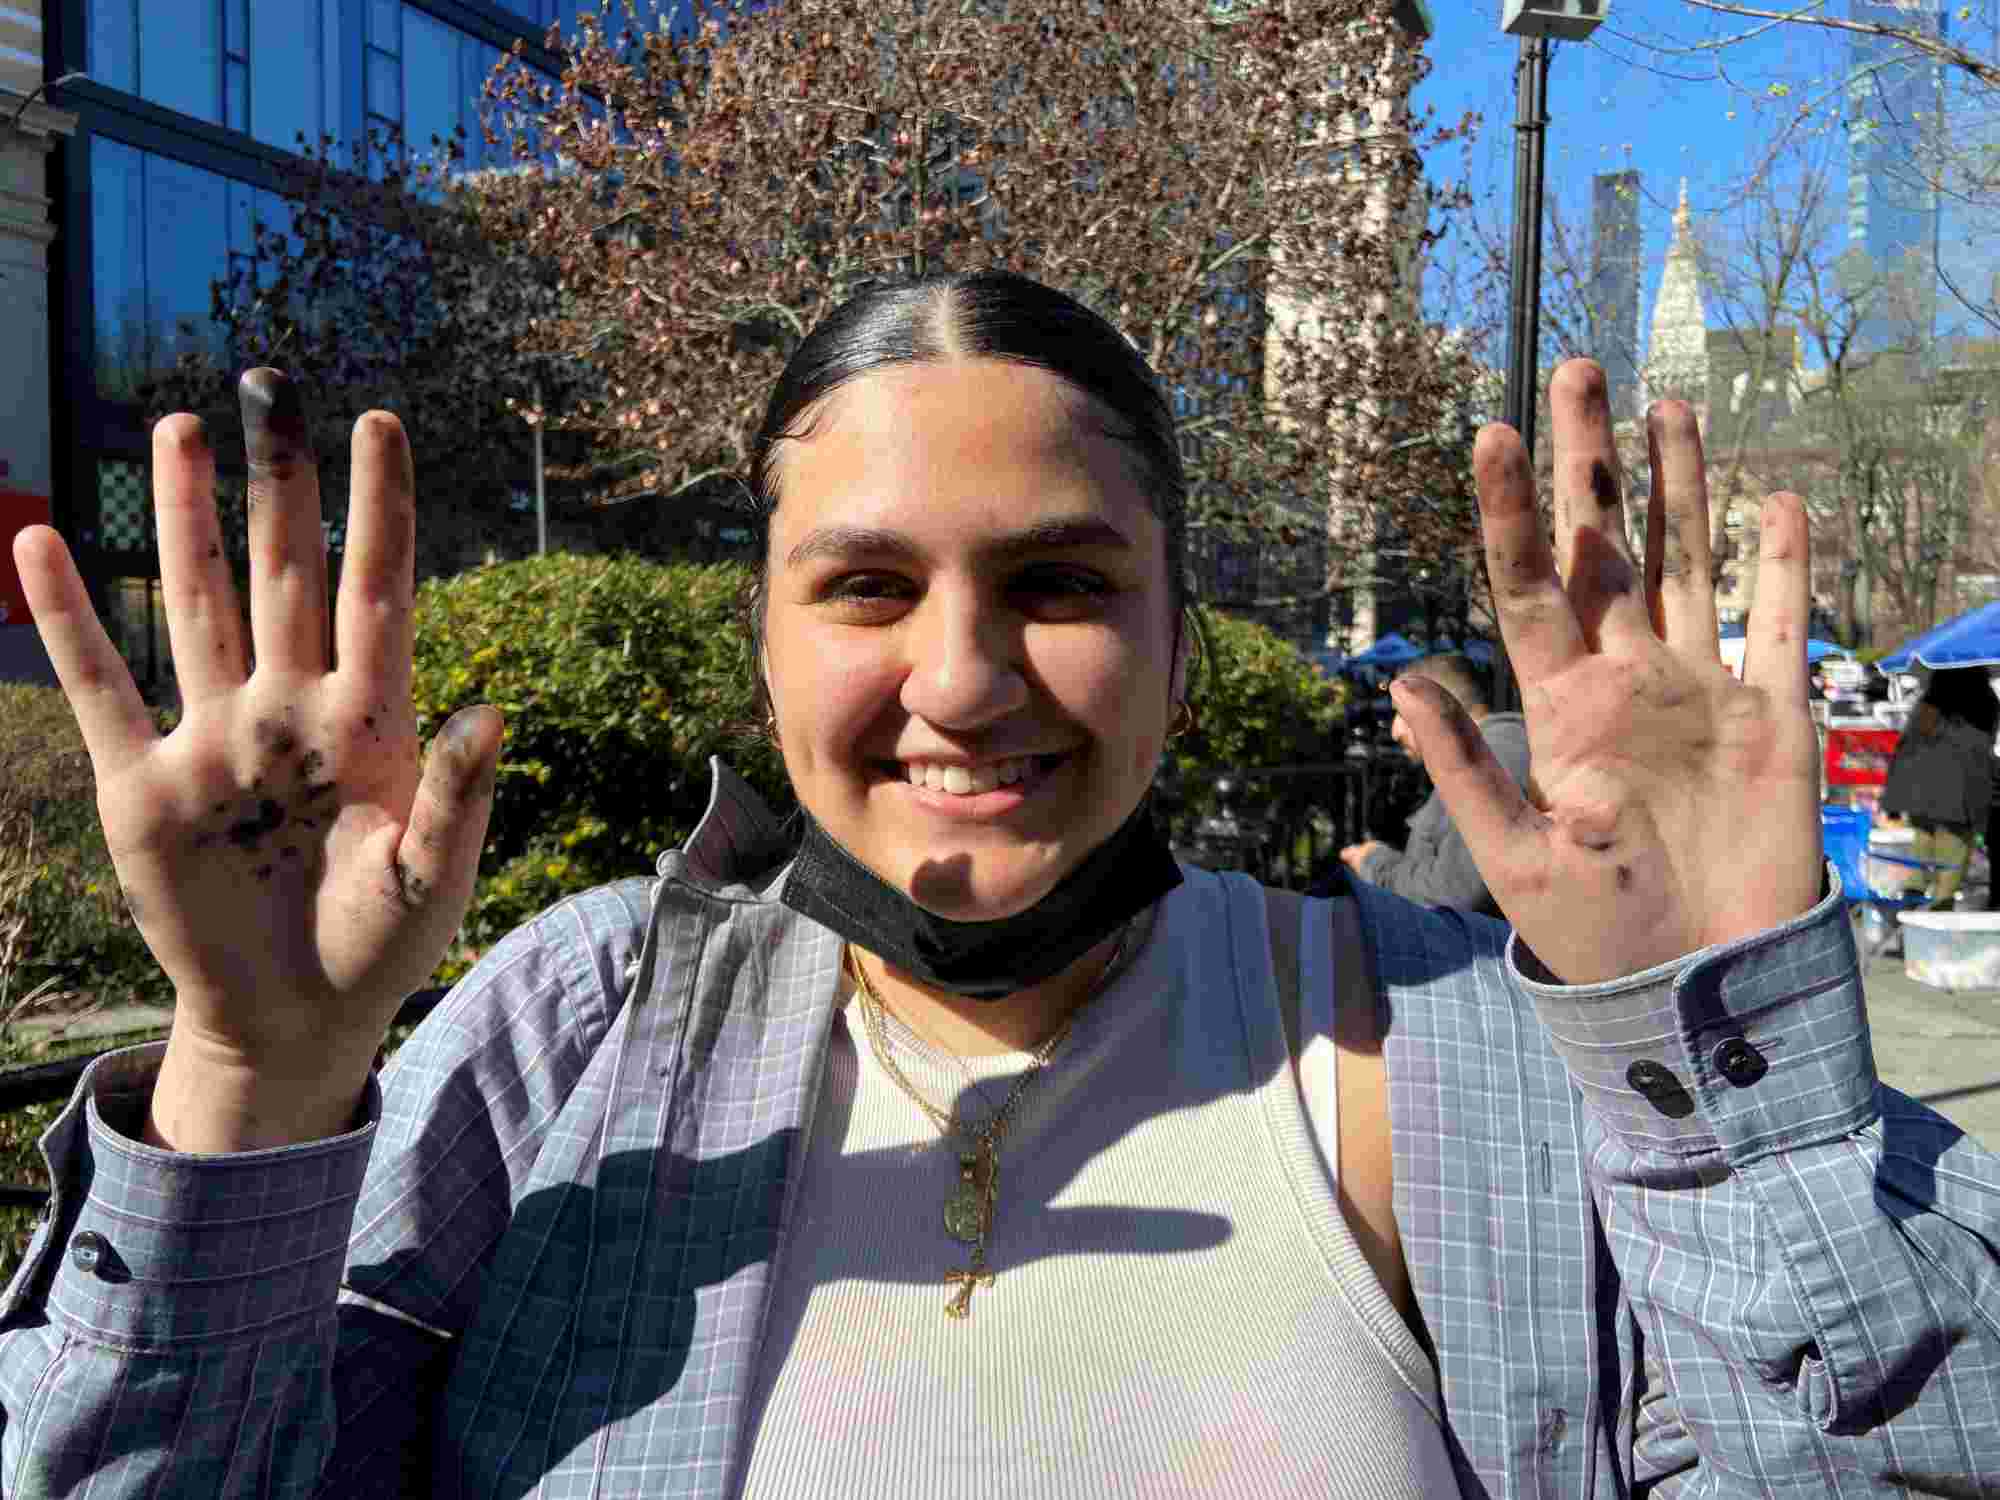 Art New York student Angelica Aranda holds up two hands stained with ink while smiling in New York City.